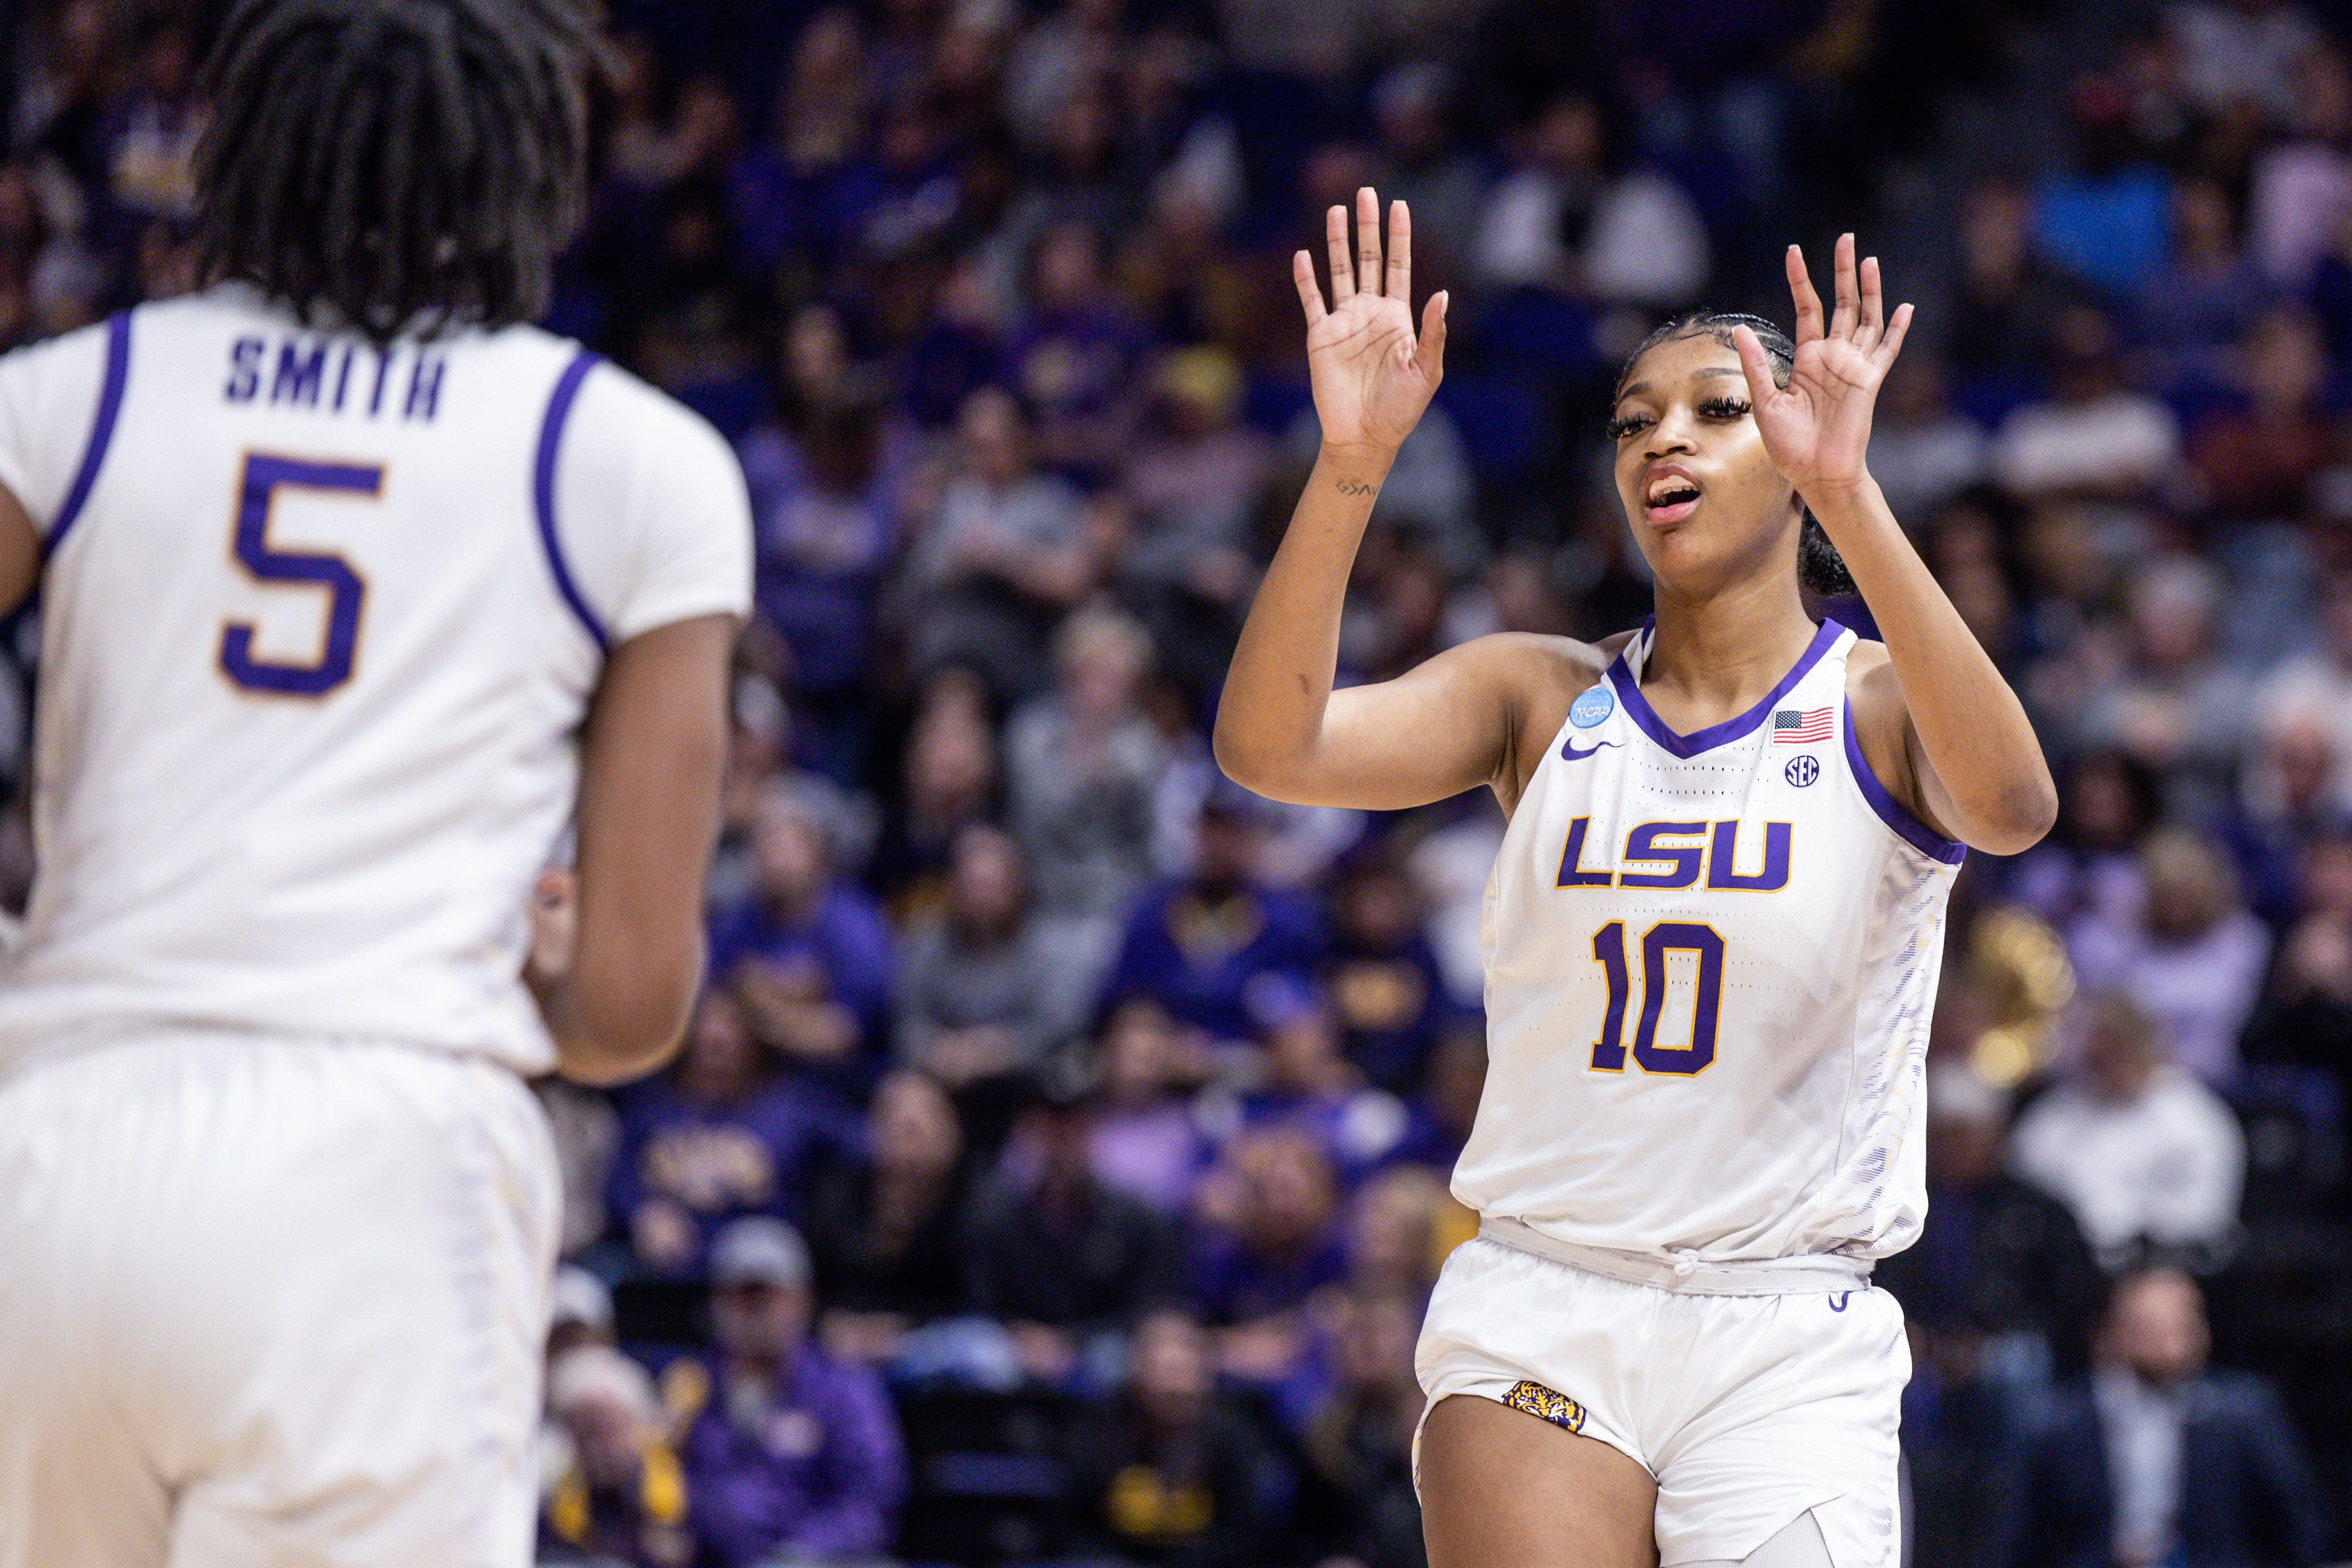 LSU Tigers forward Angel Reese (10) tags forward Sa'Myah Smith (5) against the Michigan Wolverines during the first half at Pete Maravich Assembly Center in Baton Rouge, Louisiana, on Sunday, March 19, 2023.